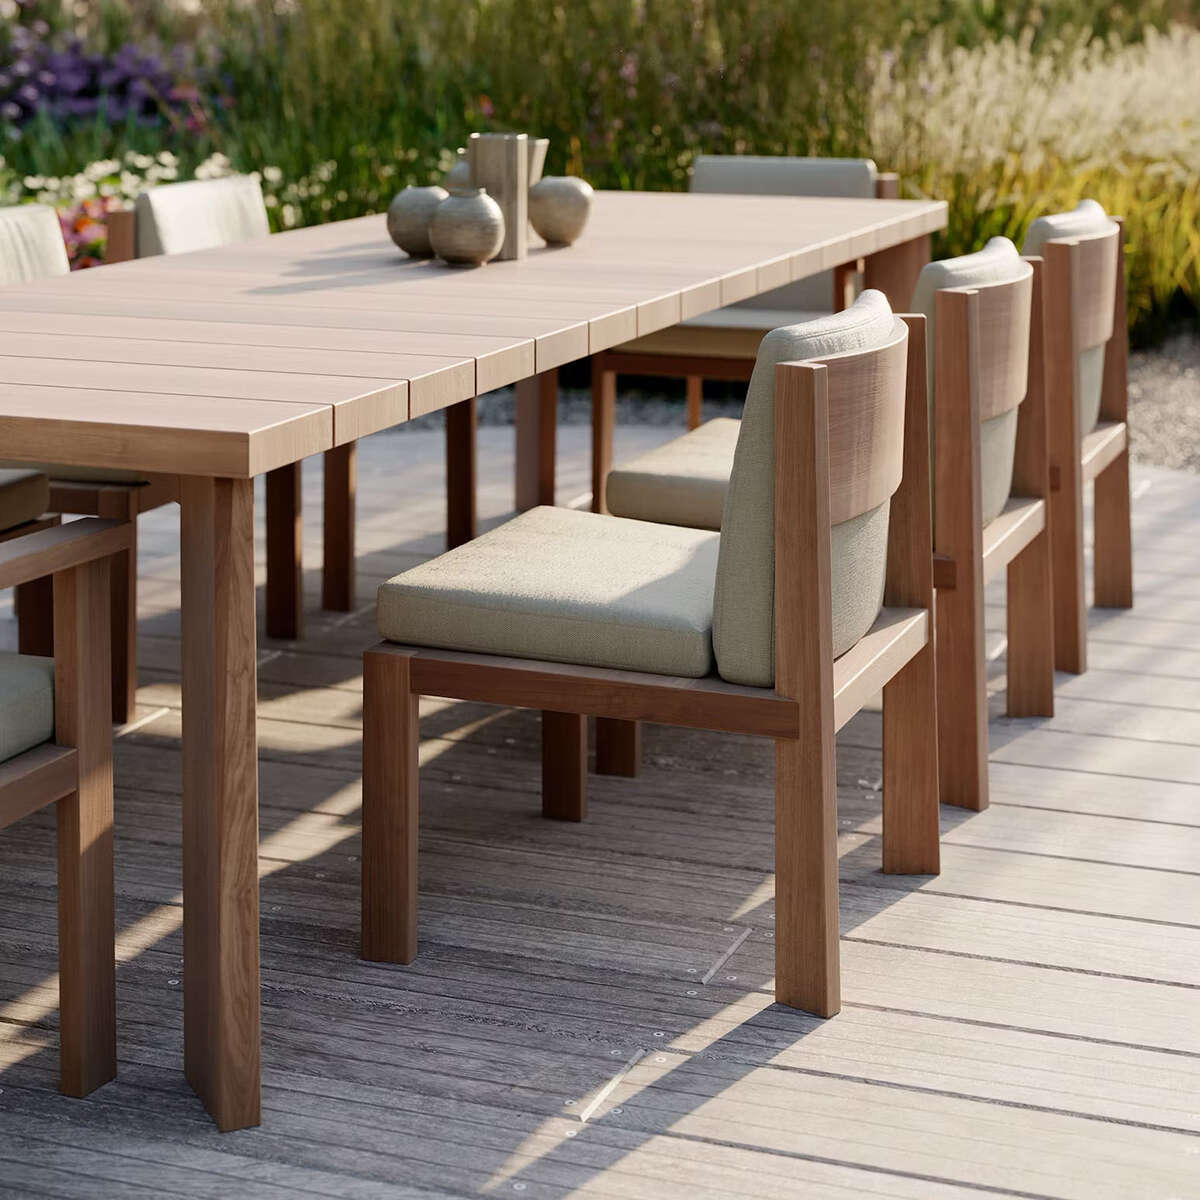 Piet Boon Timme Outdoor Dining The Modern Garden Company